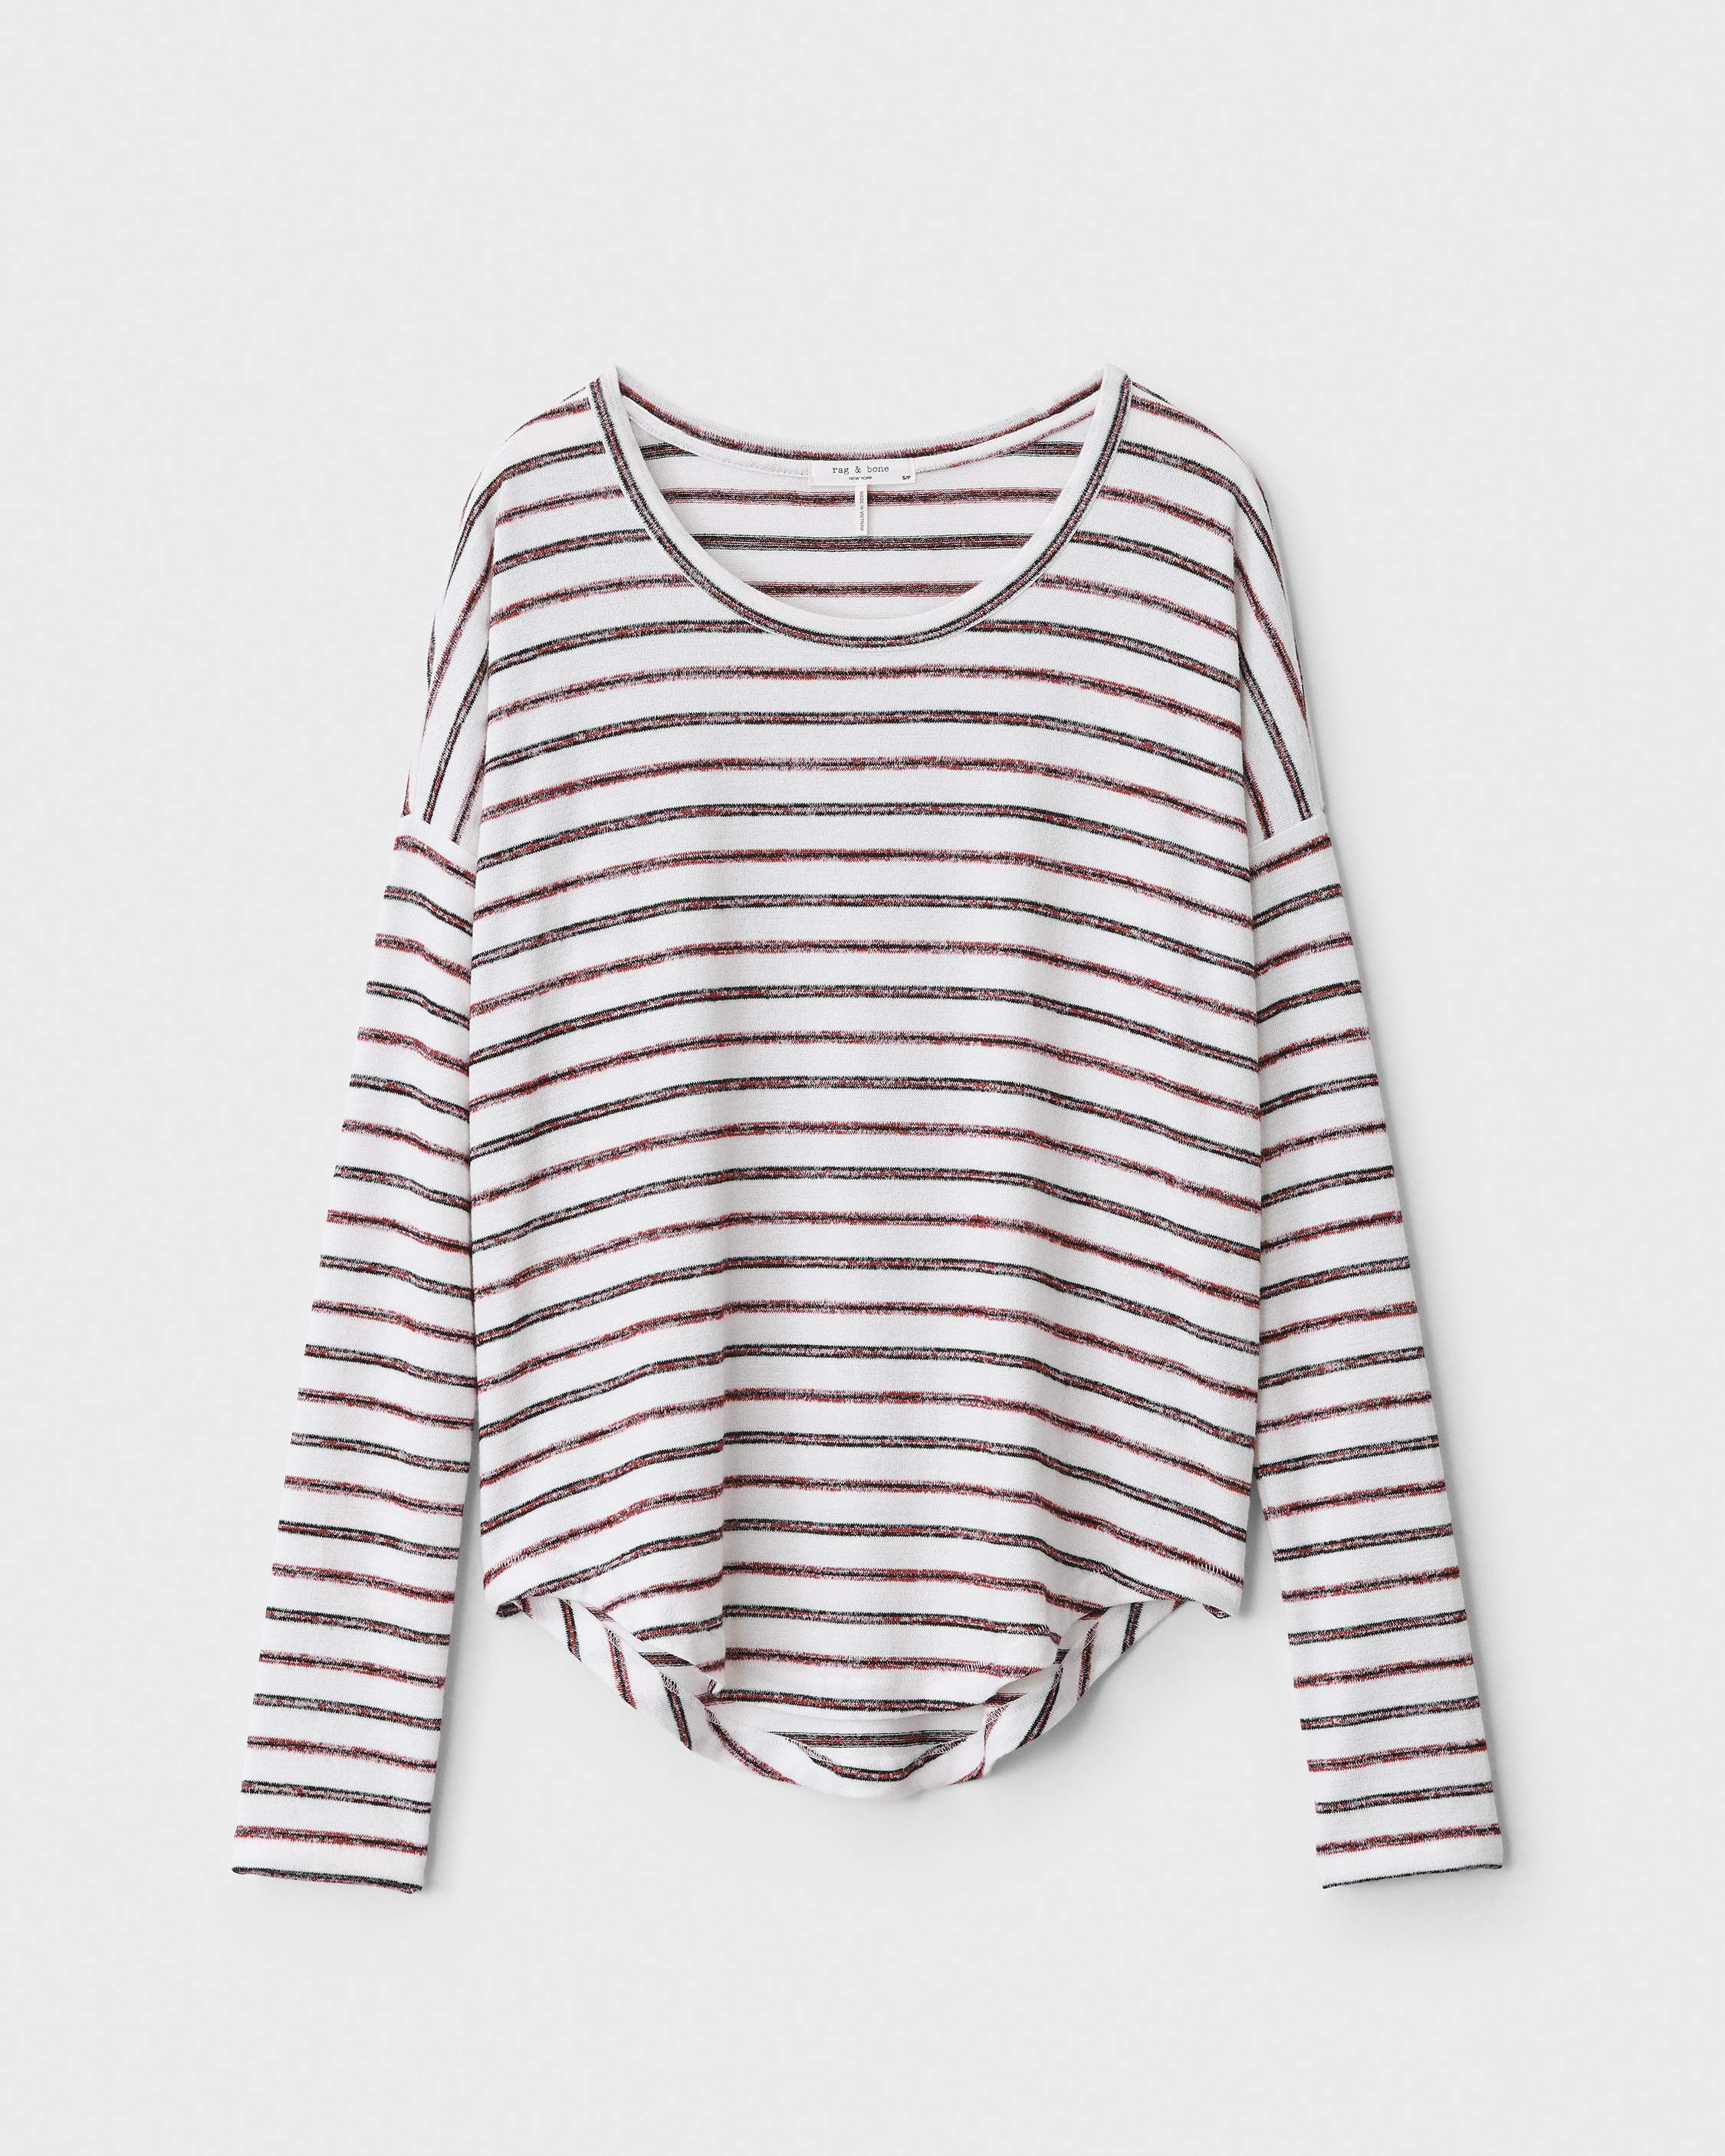 R&B The Knit Striped LS Top in Red Multi